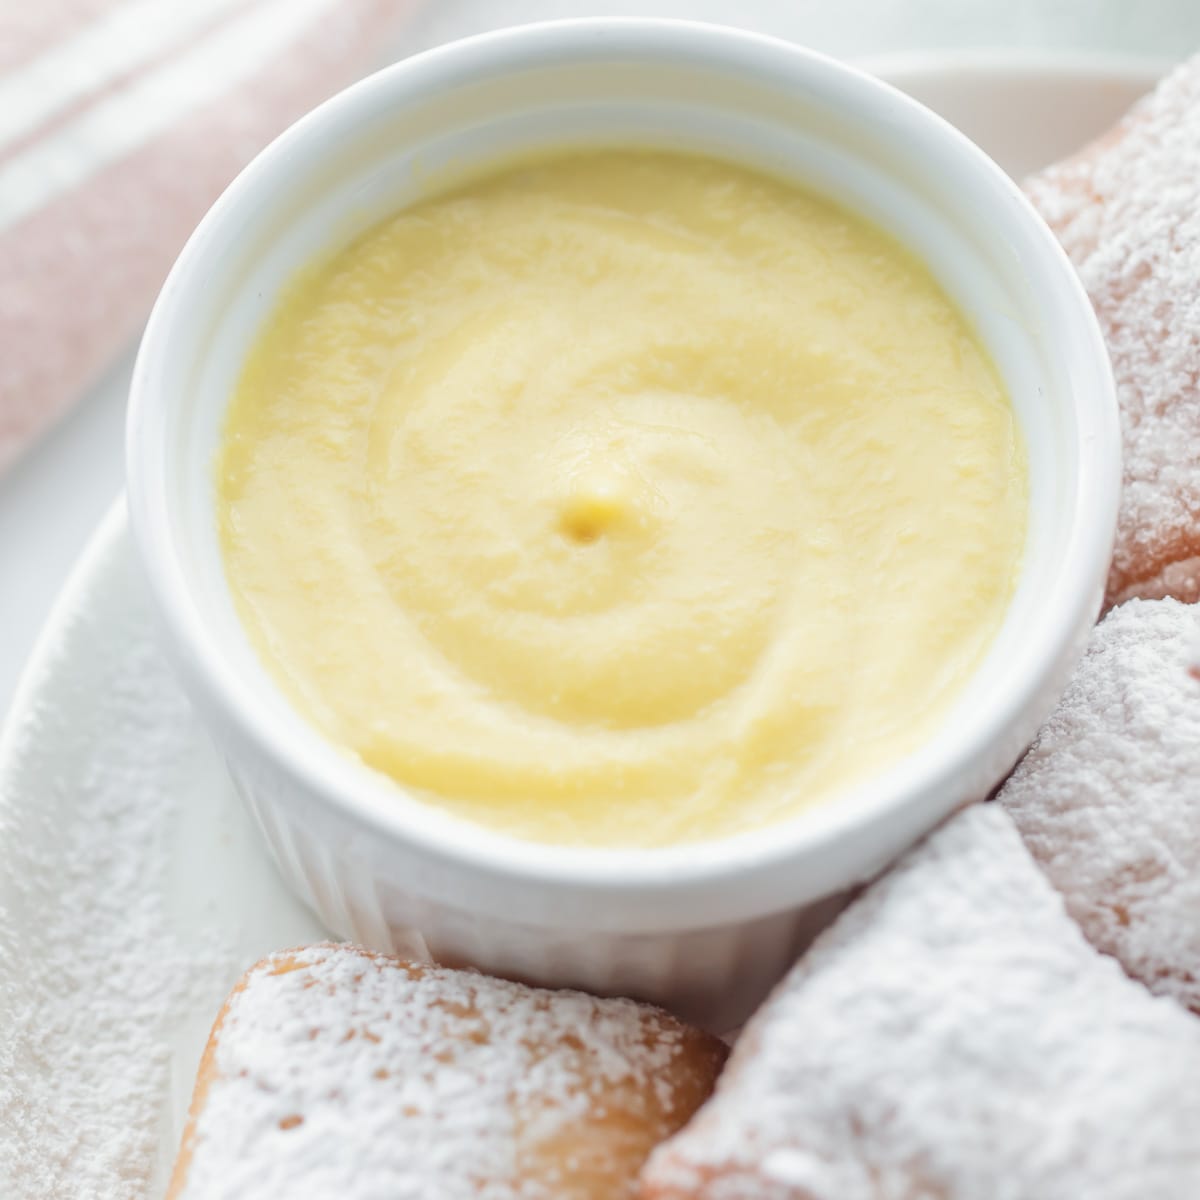 Vanilla crème anglaise in a white custard bowl served with beignets